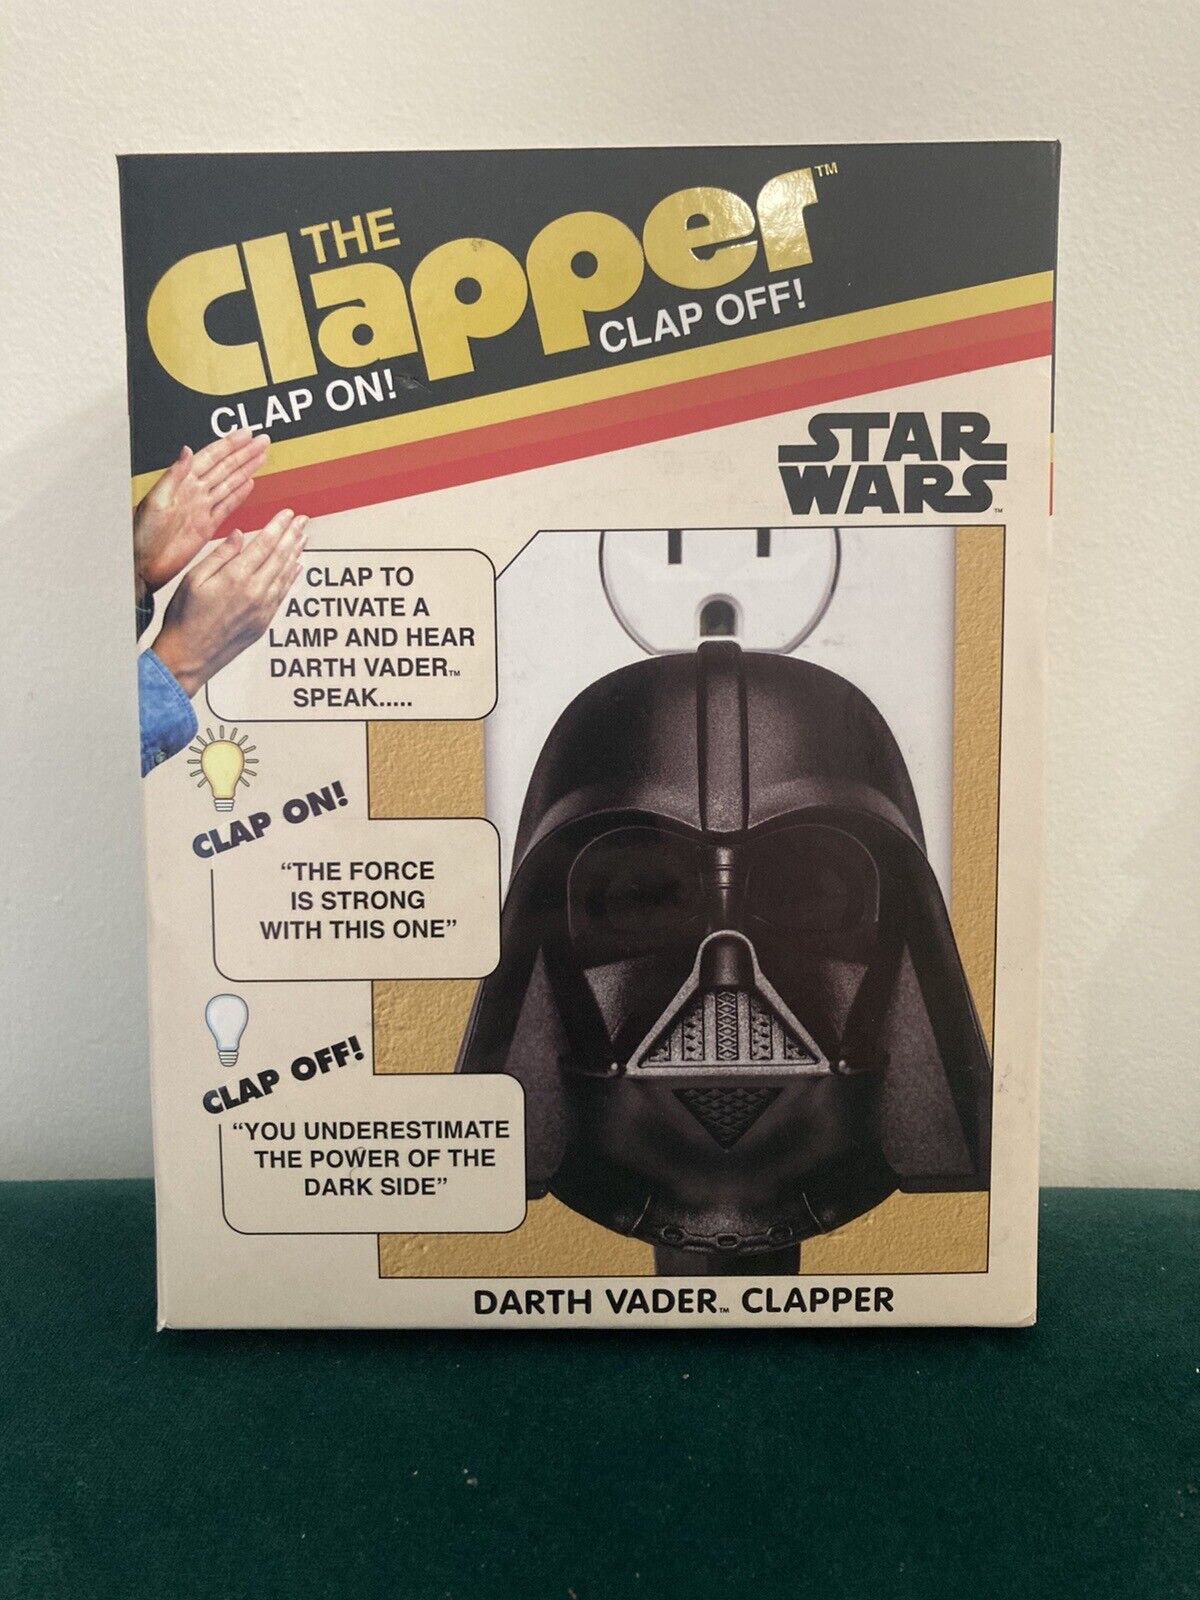 Darth Vader Star Wars Clapper In Vintage Clapper Packaging 2018 New In Box